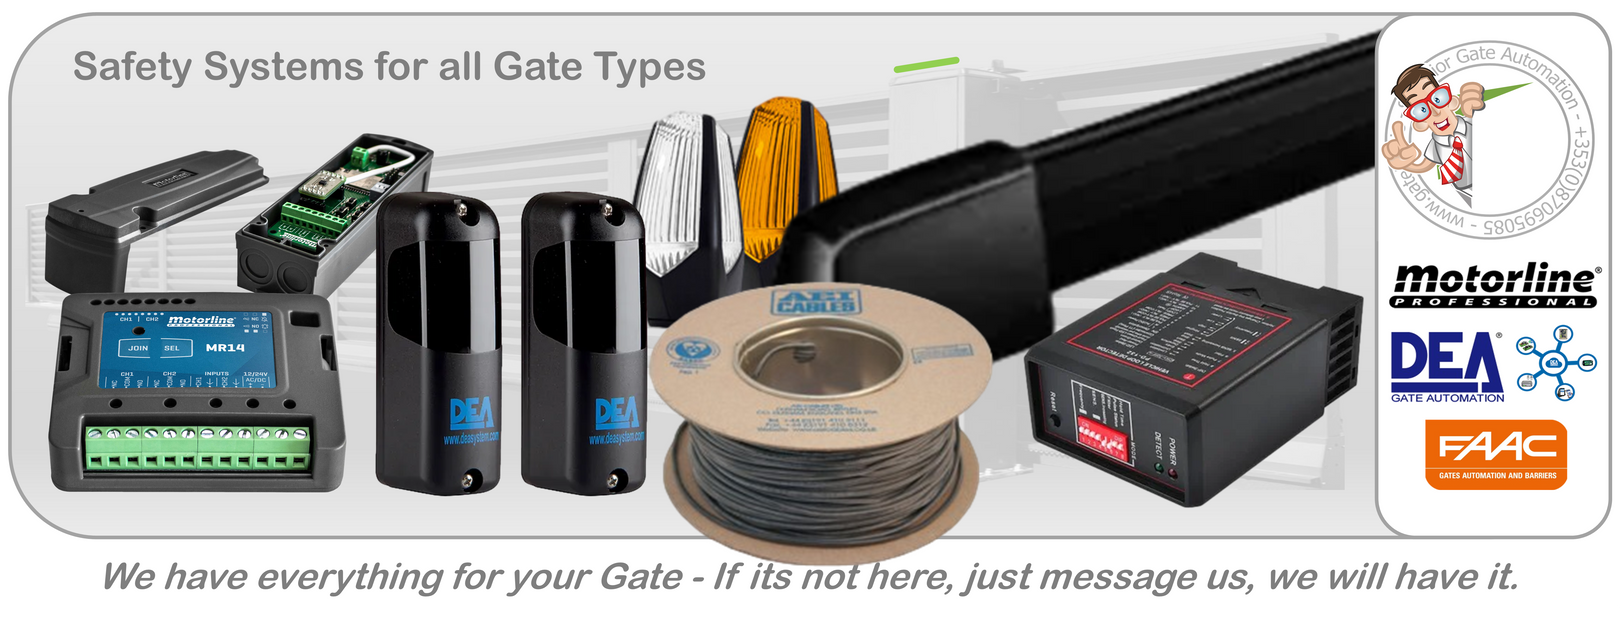 Safety Systems for all Gate Types